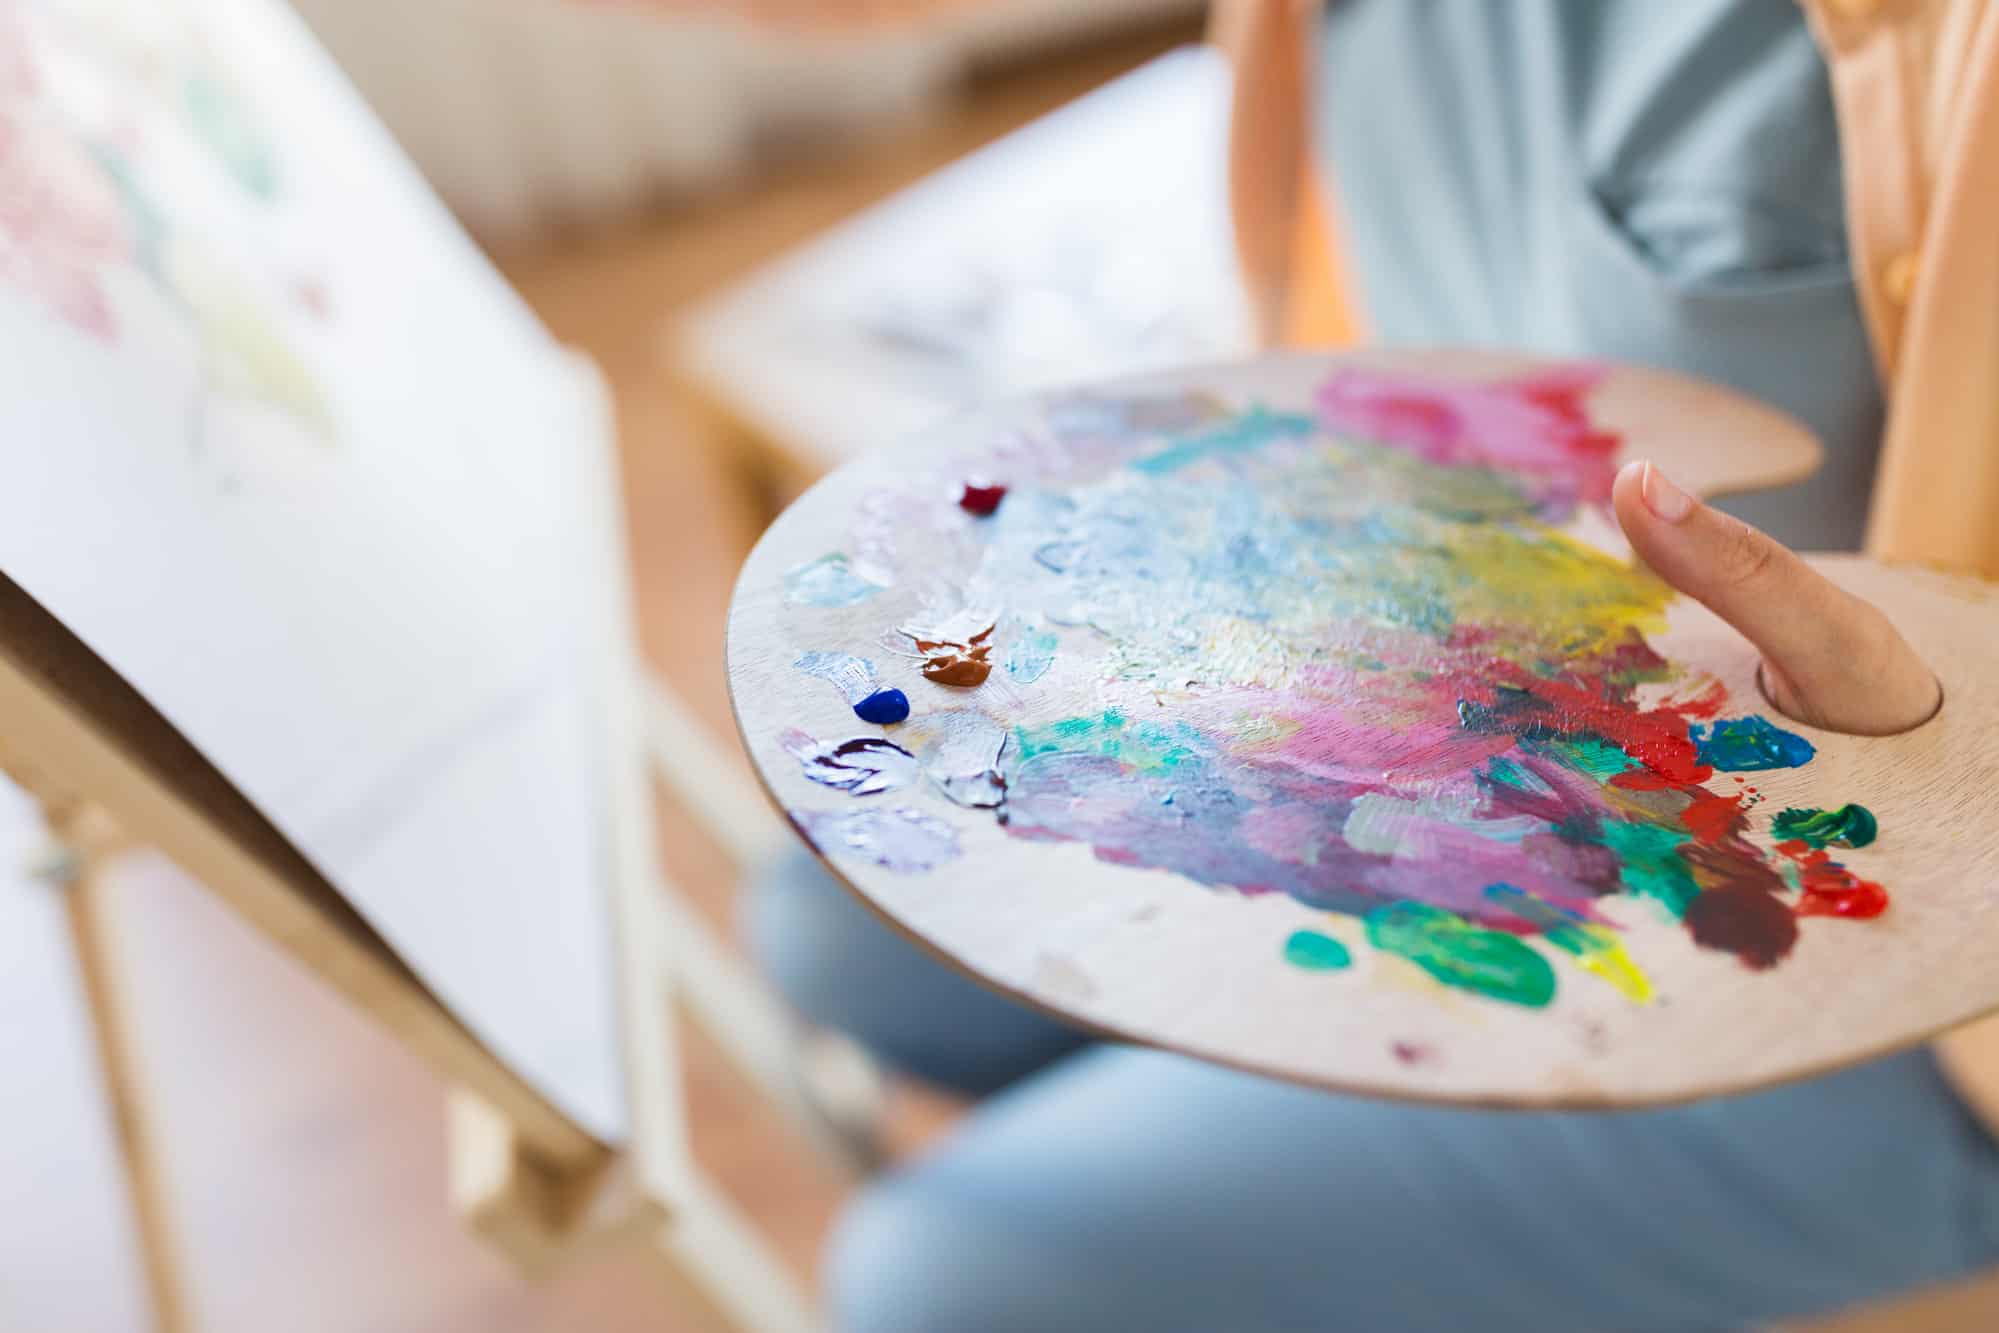 Self Soothing Methods To Reduce Anxiety Through Art